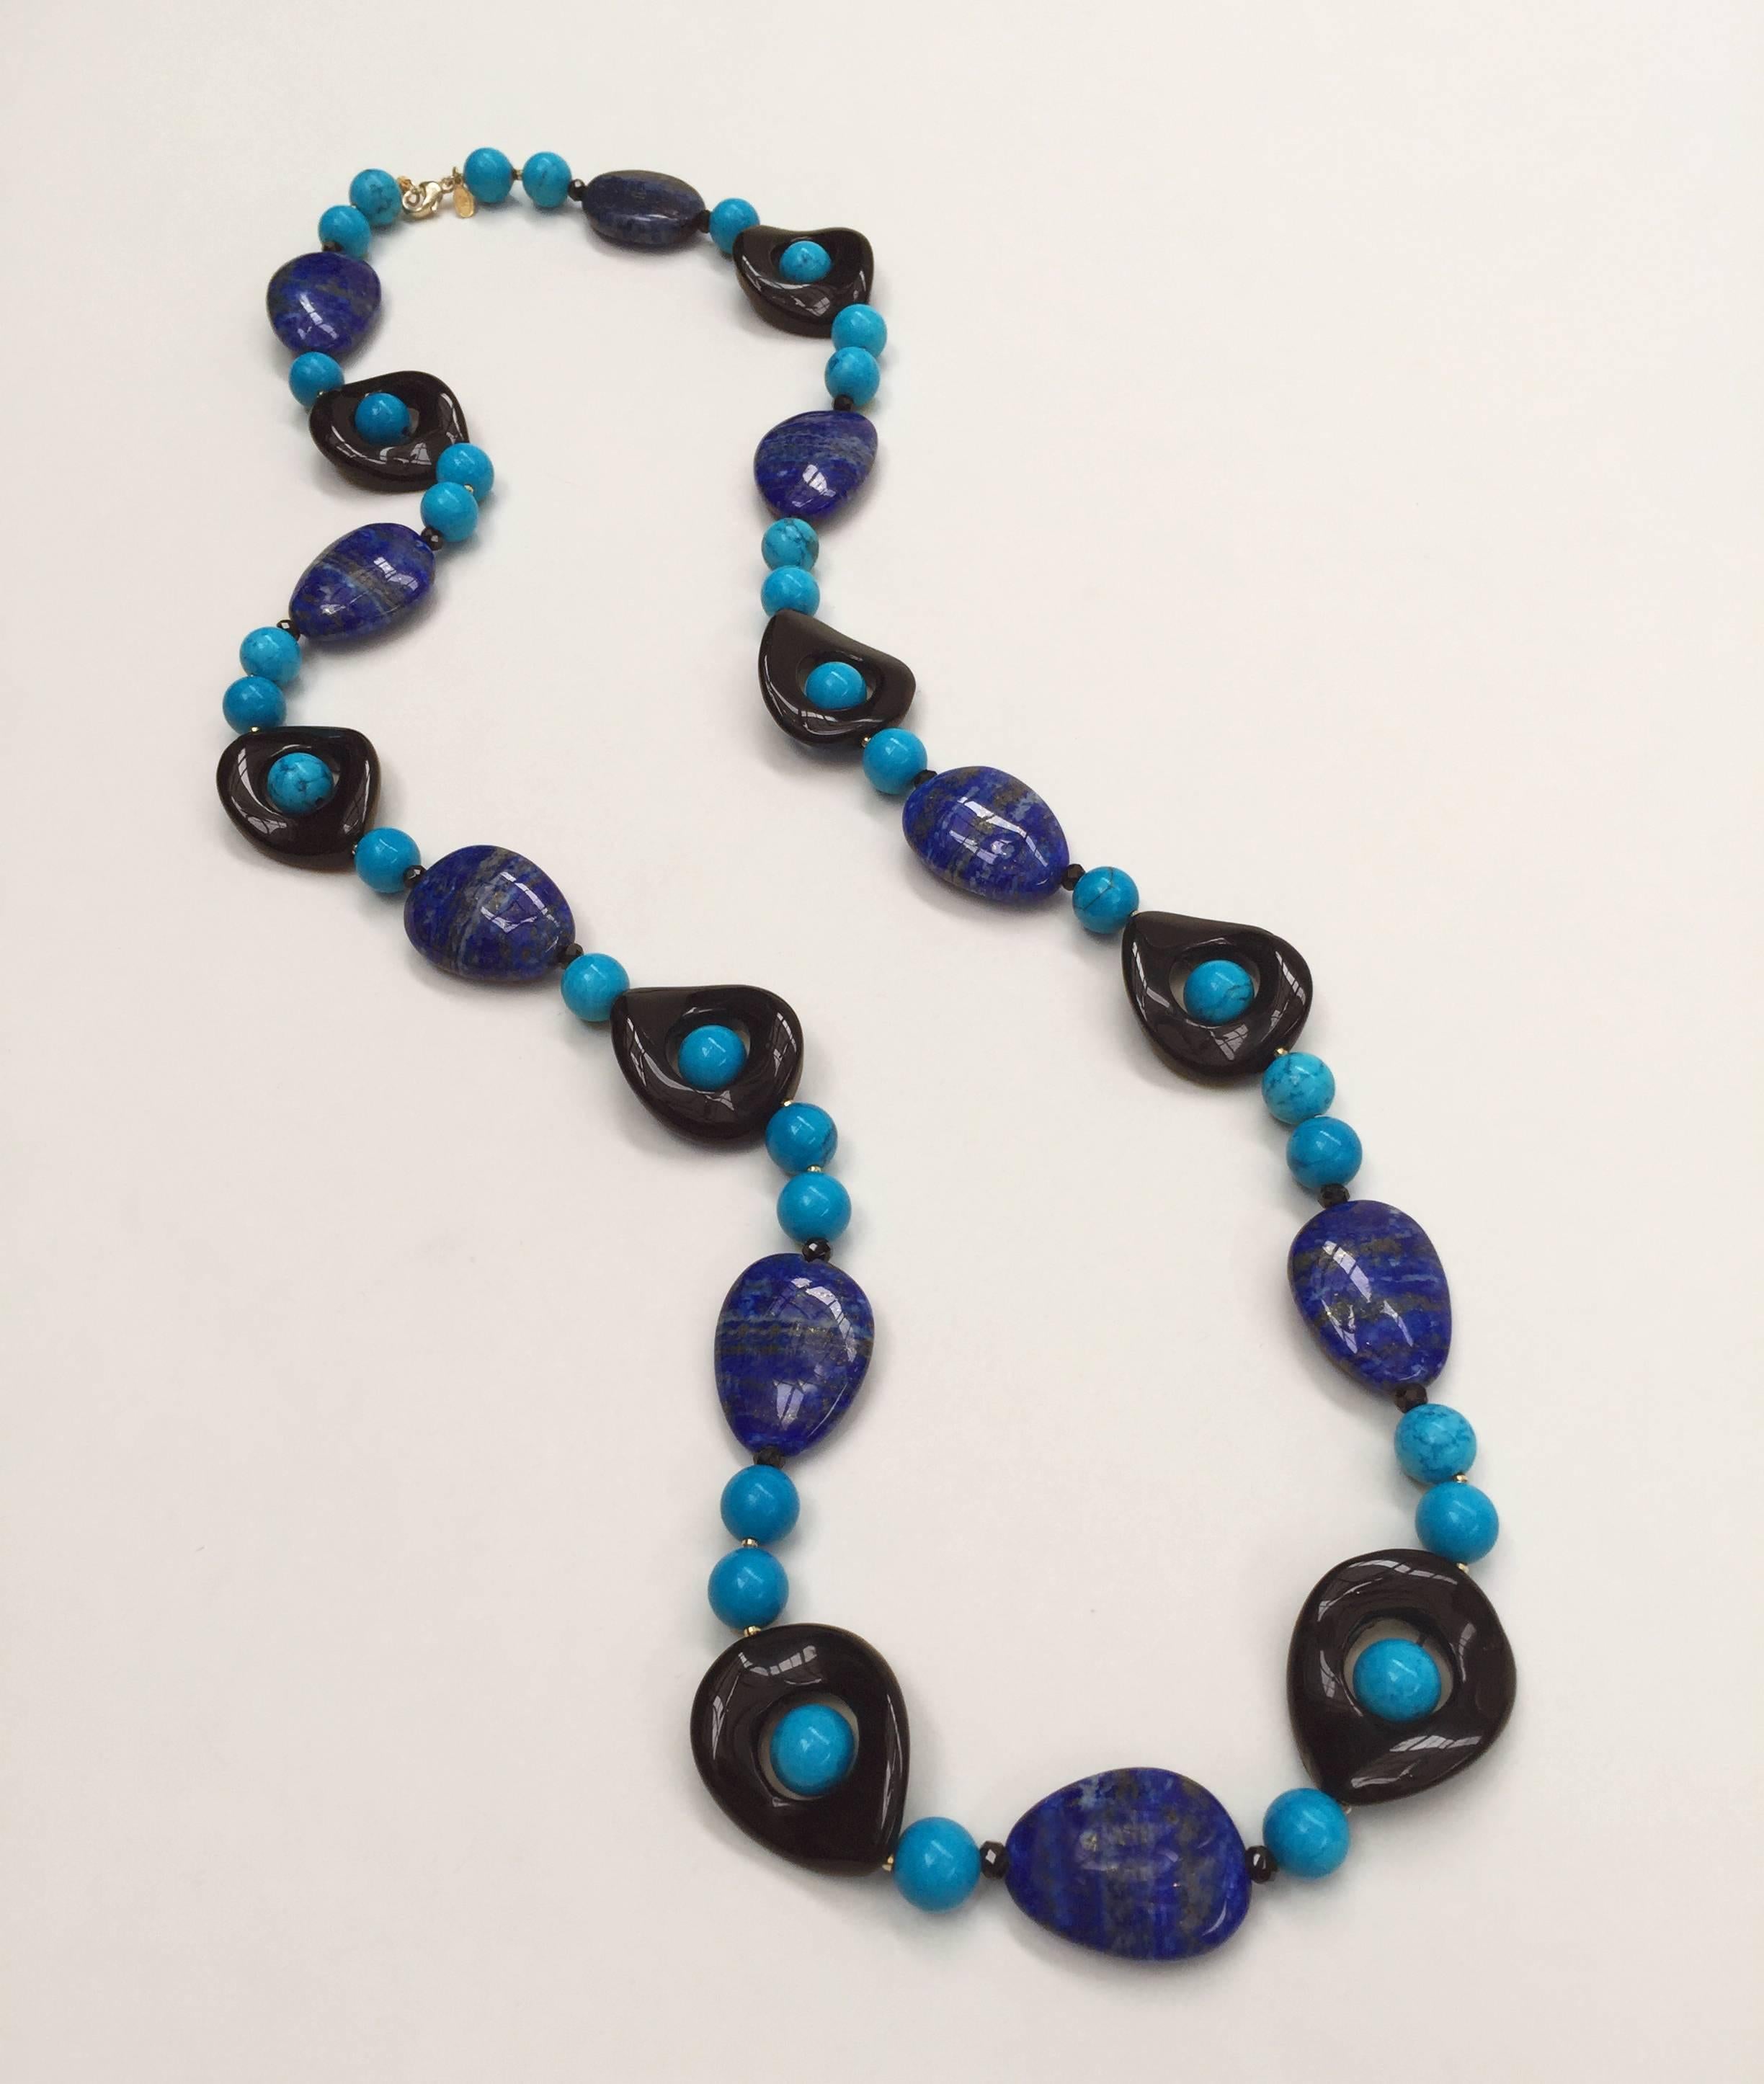 Turquoise, Lapis Lazuli and Onyx Necklace with 14 Karat Yellow Gold Clasp 1